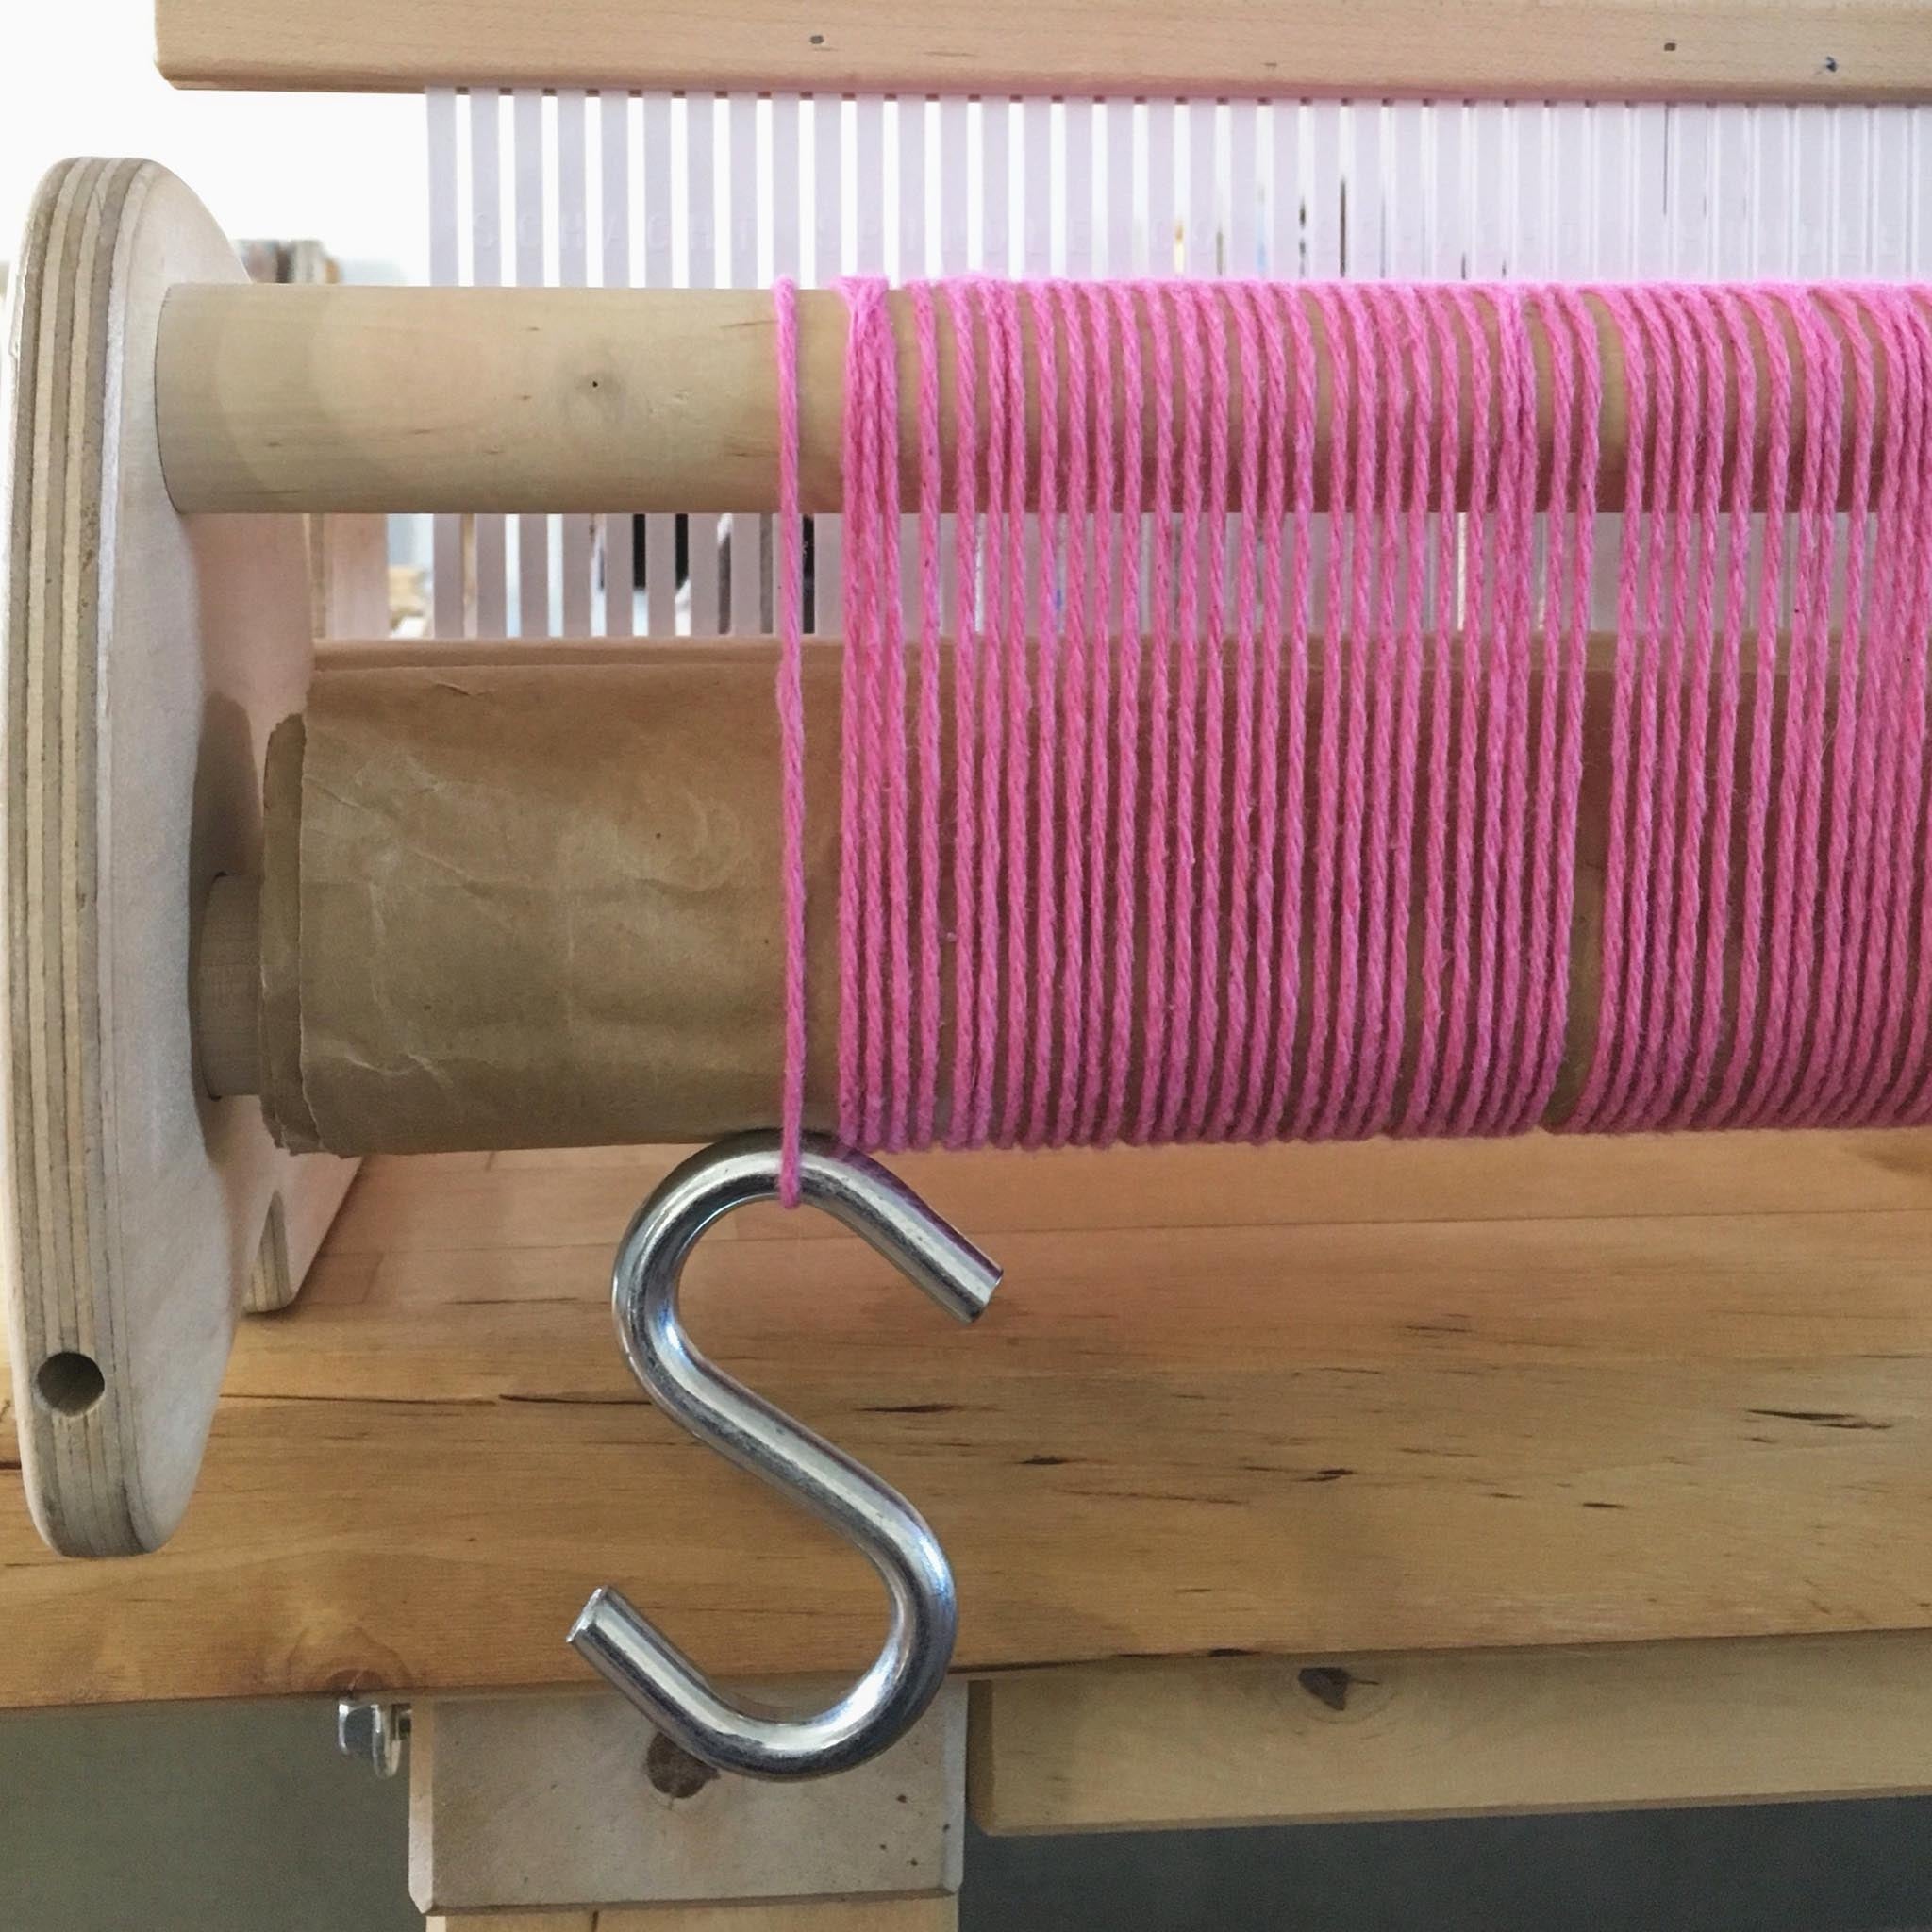 Small Loom - Another way to lay the loose ends of the